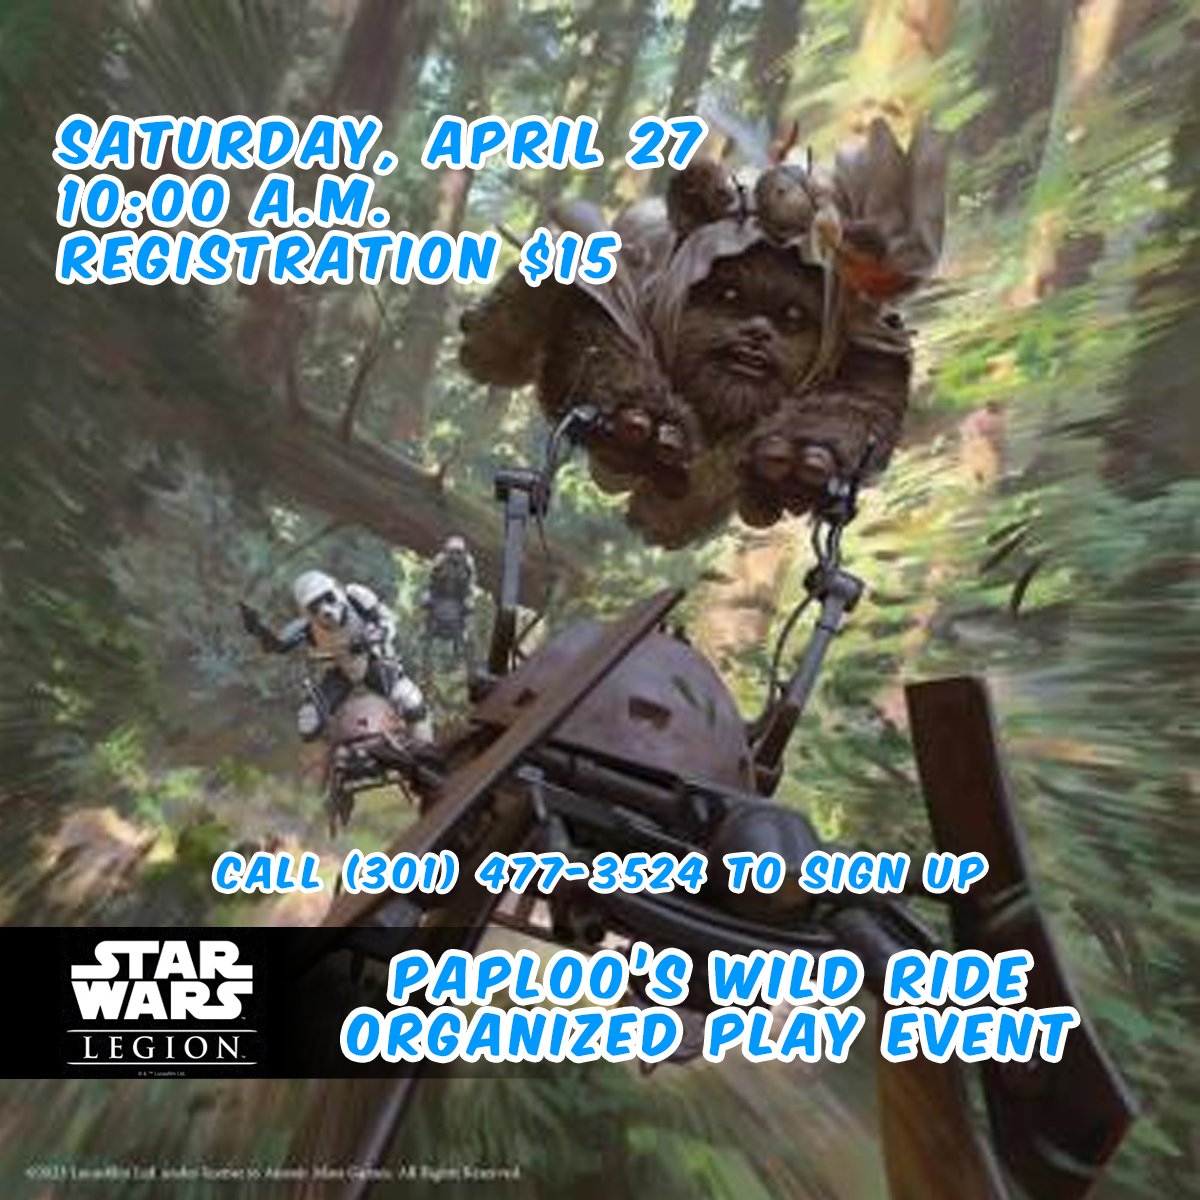 Join us for a fun-filled Star Wars Legion event featuring the Paploo's Wild Ride OP Kit! Bring your 800 point army and compete in 3 exciting games. Win alternate art cards and other prizes! It's going to be a blast! See you there!